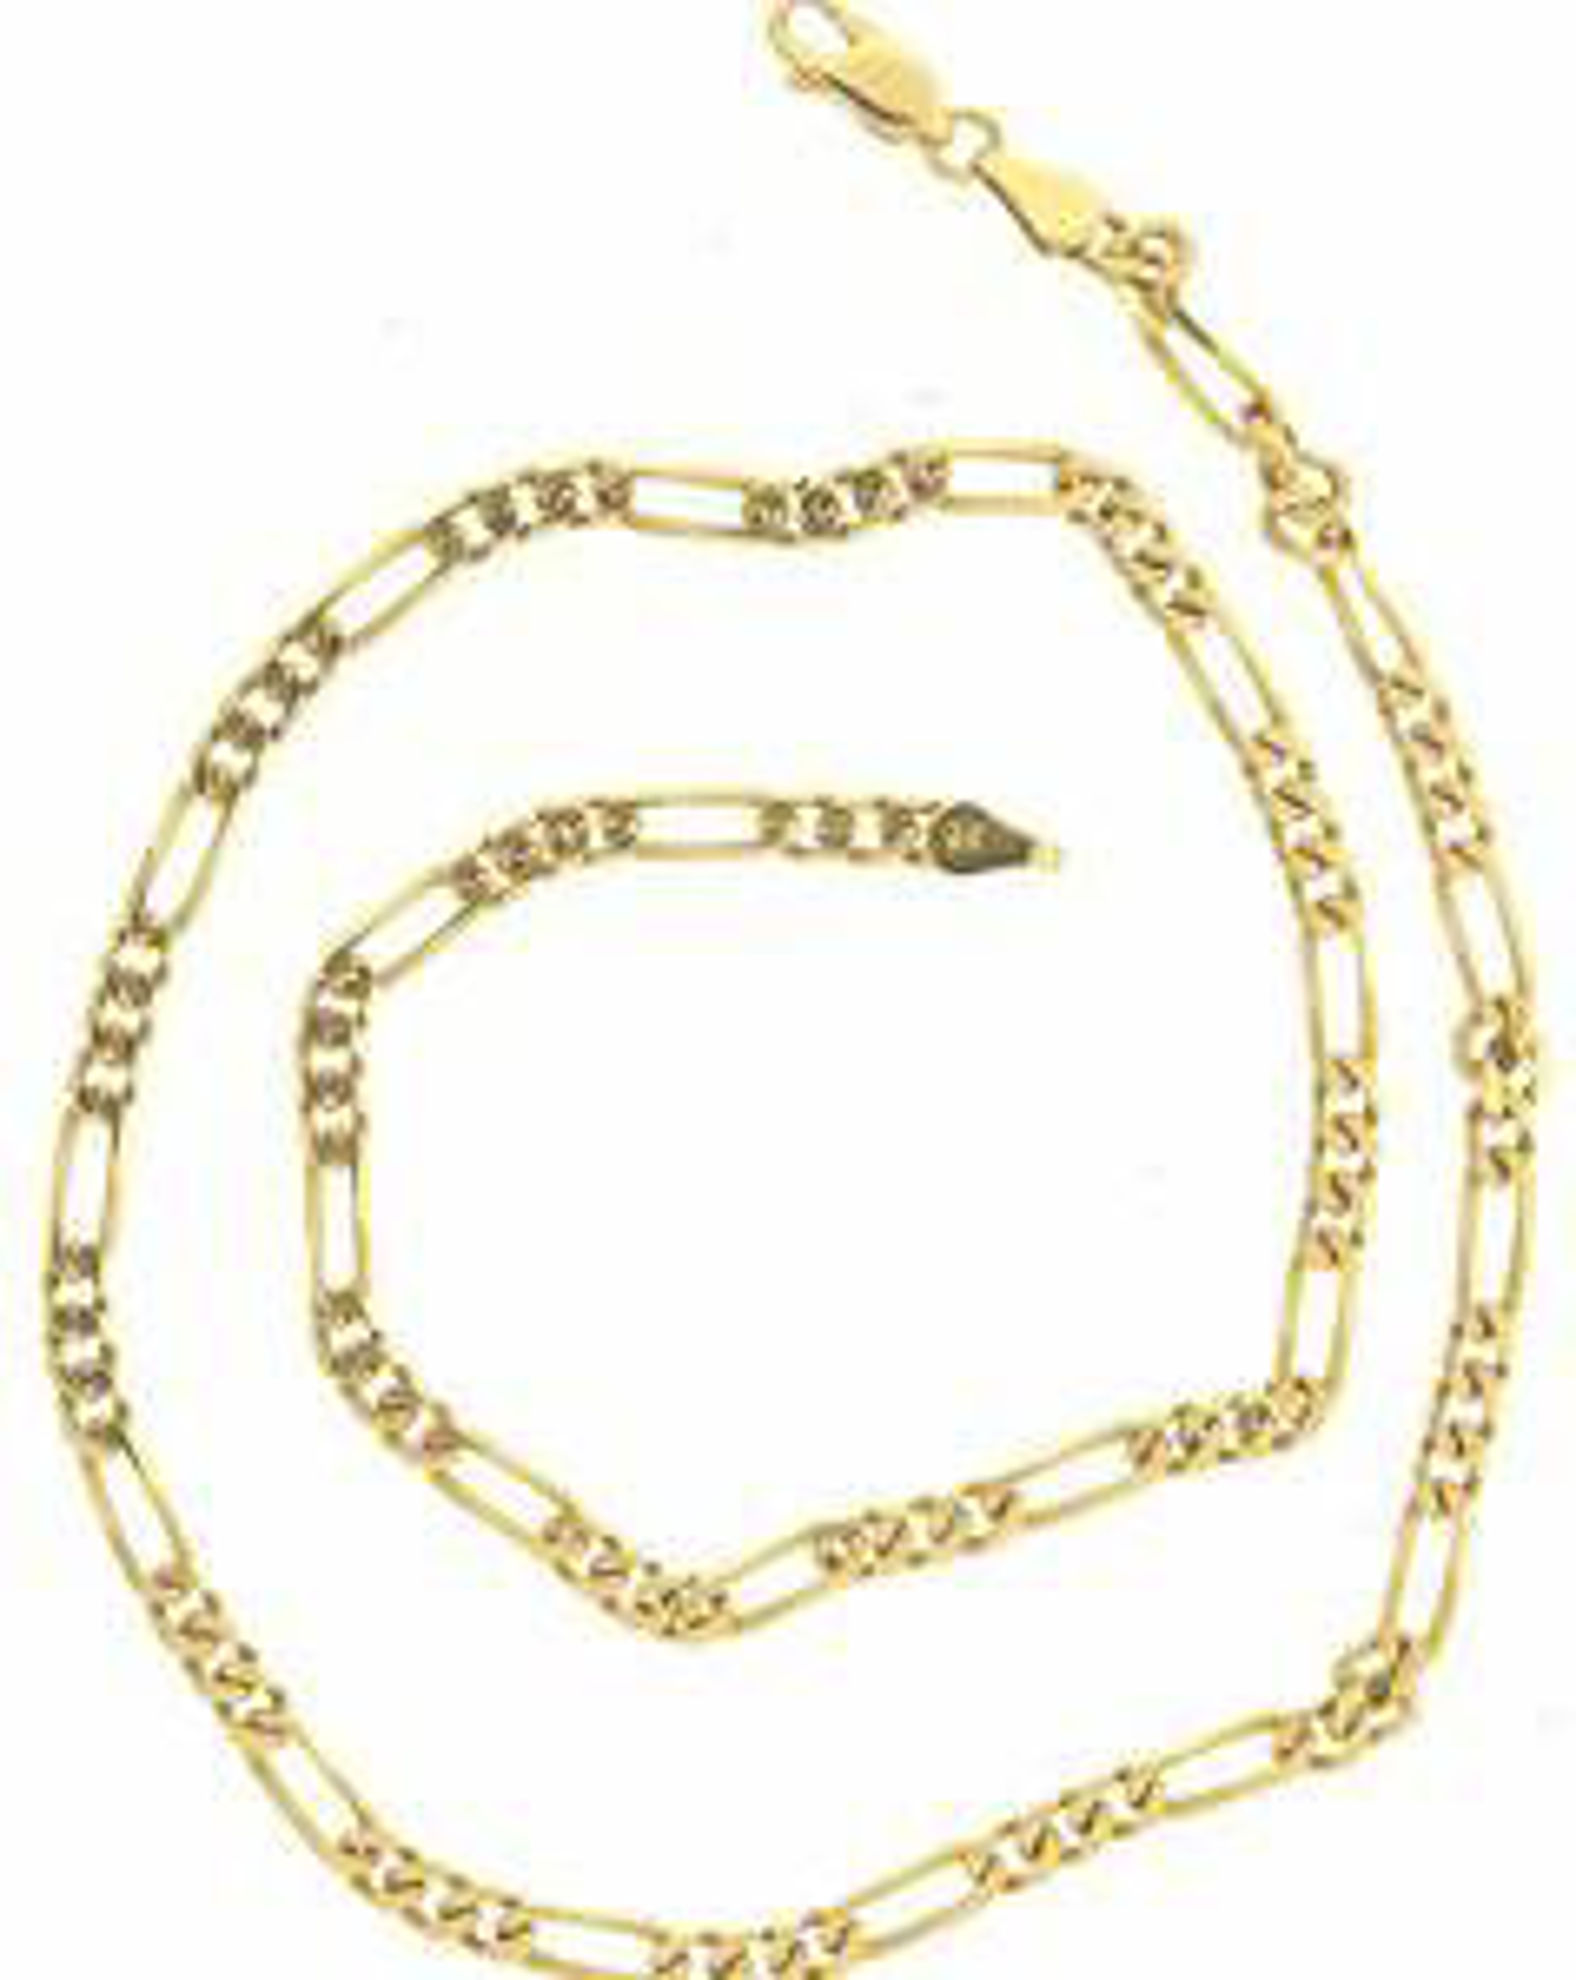 Picture of Chains 14kt-8.9 DWT, 13.8 Grams